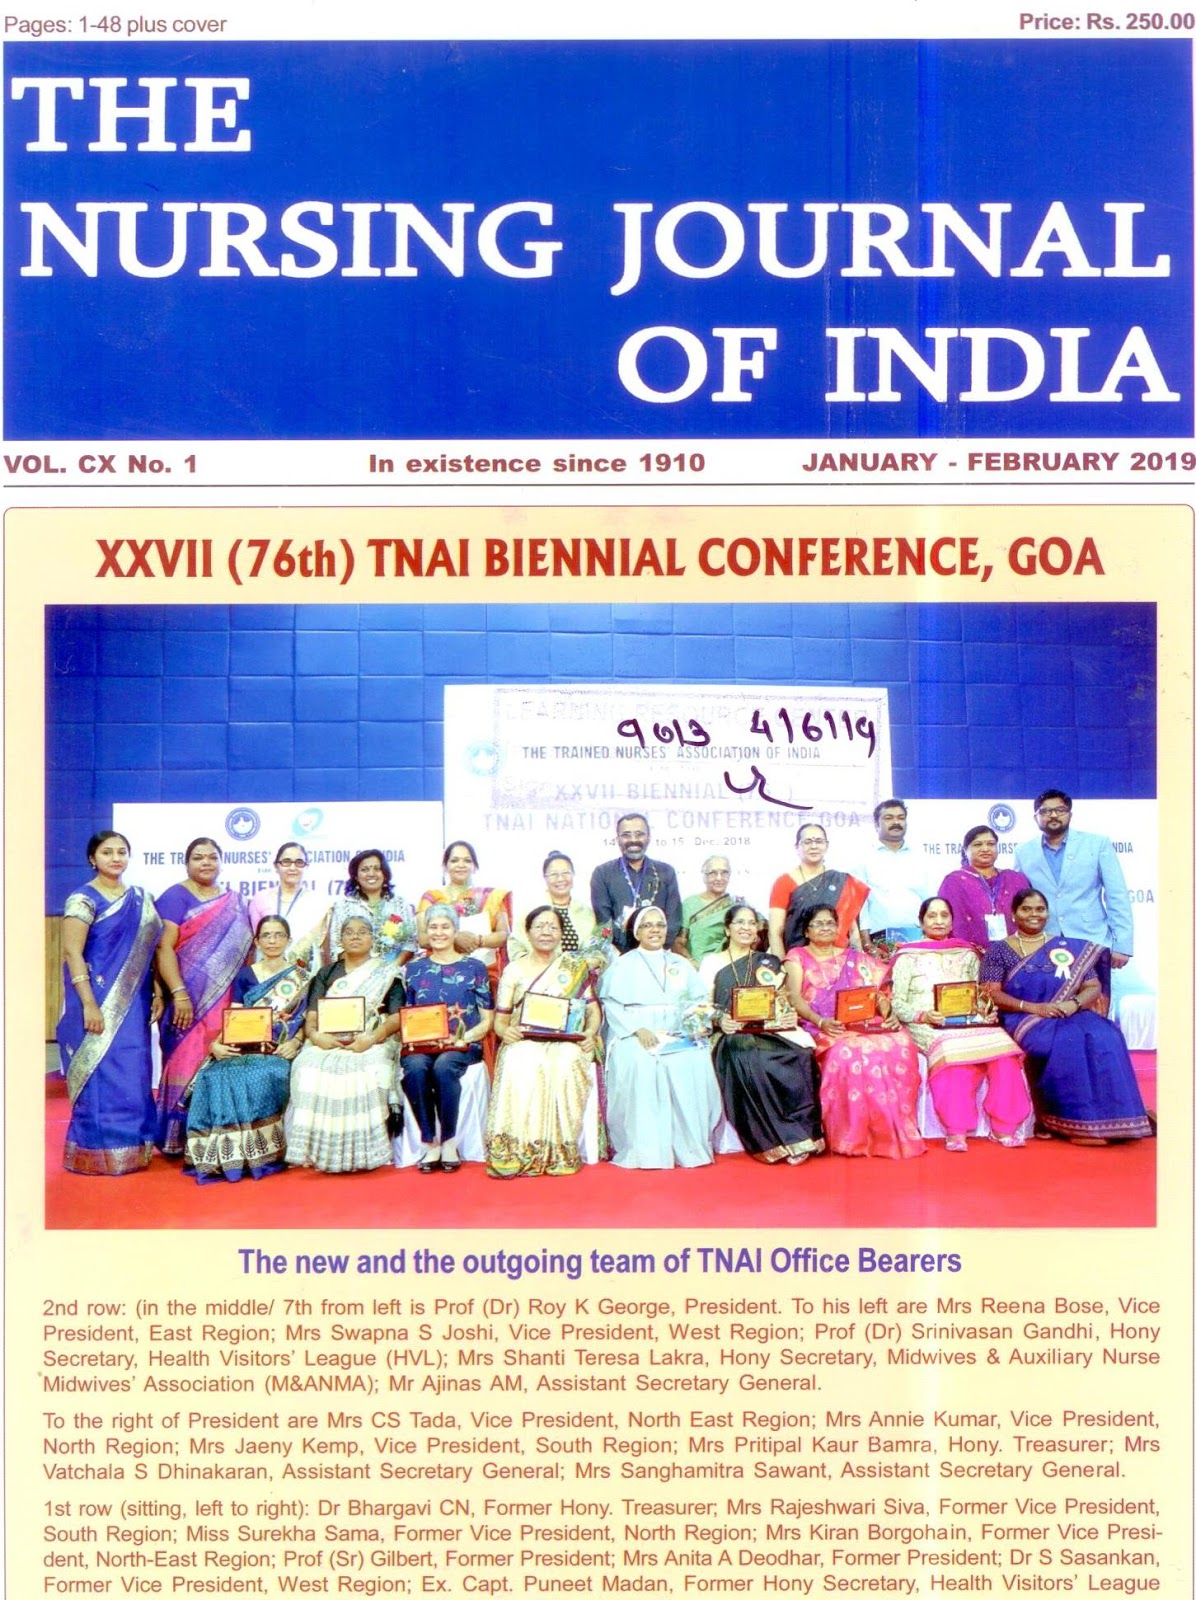 http://www.tnaionline.org/cms/newsimages/file/nji/december%202017/content.pdf